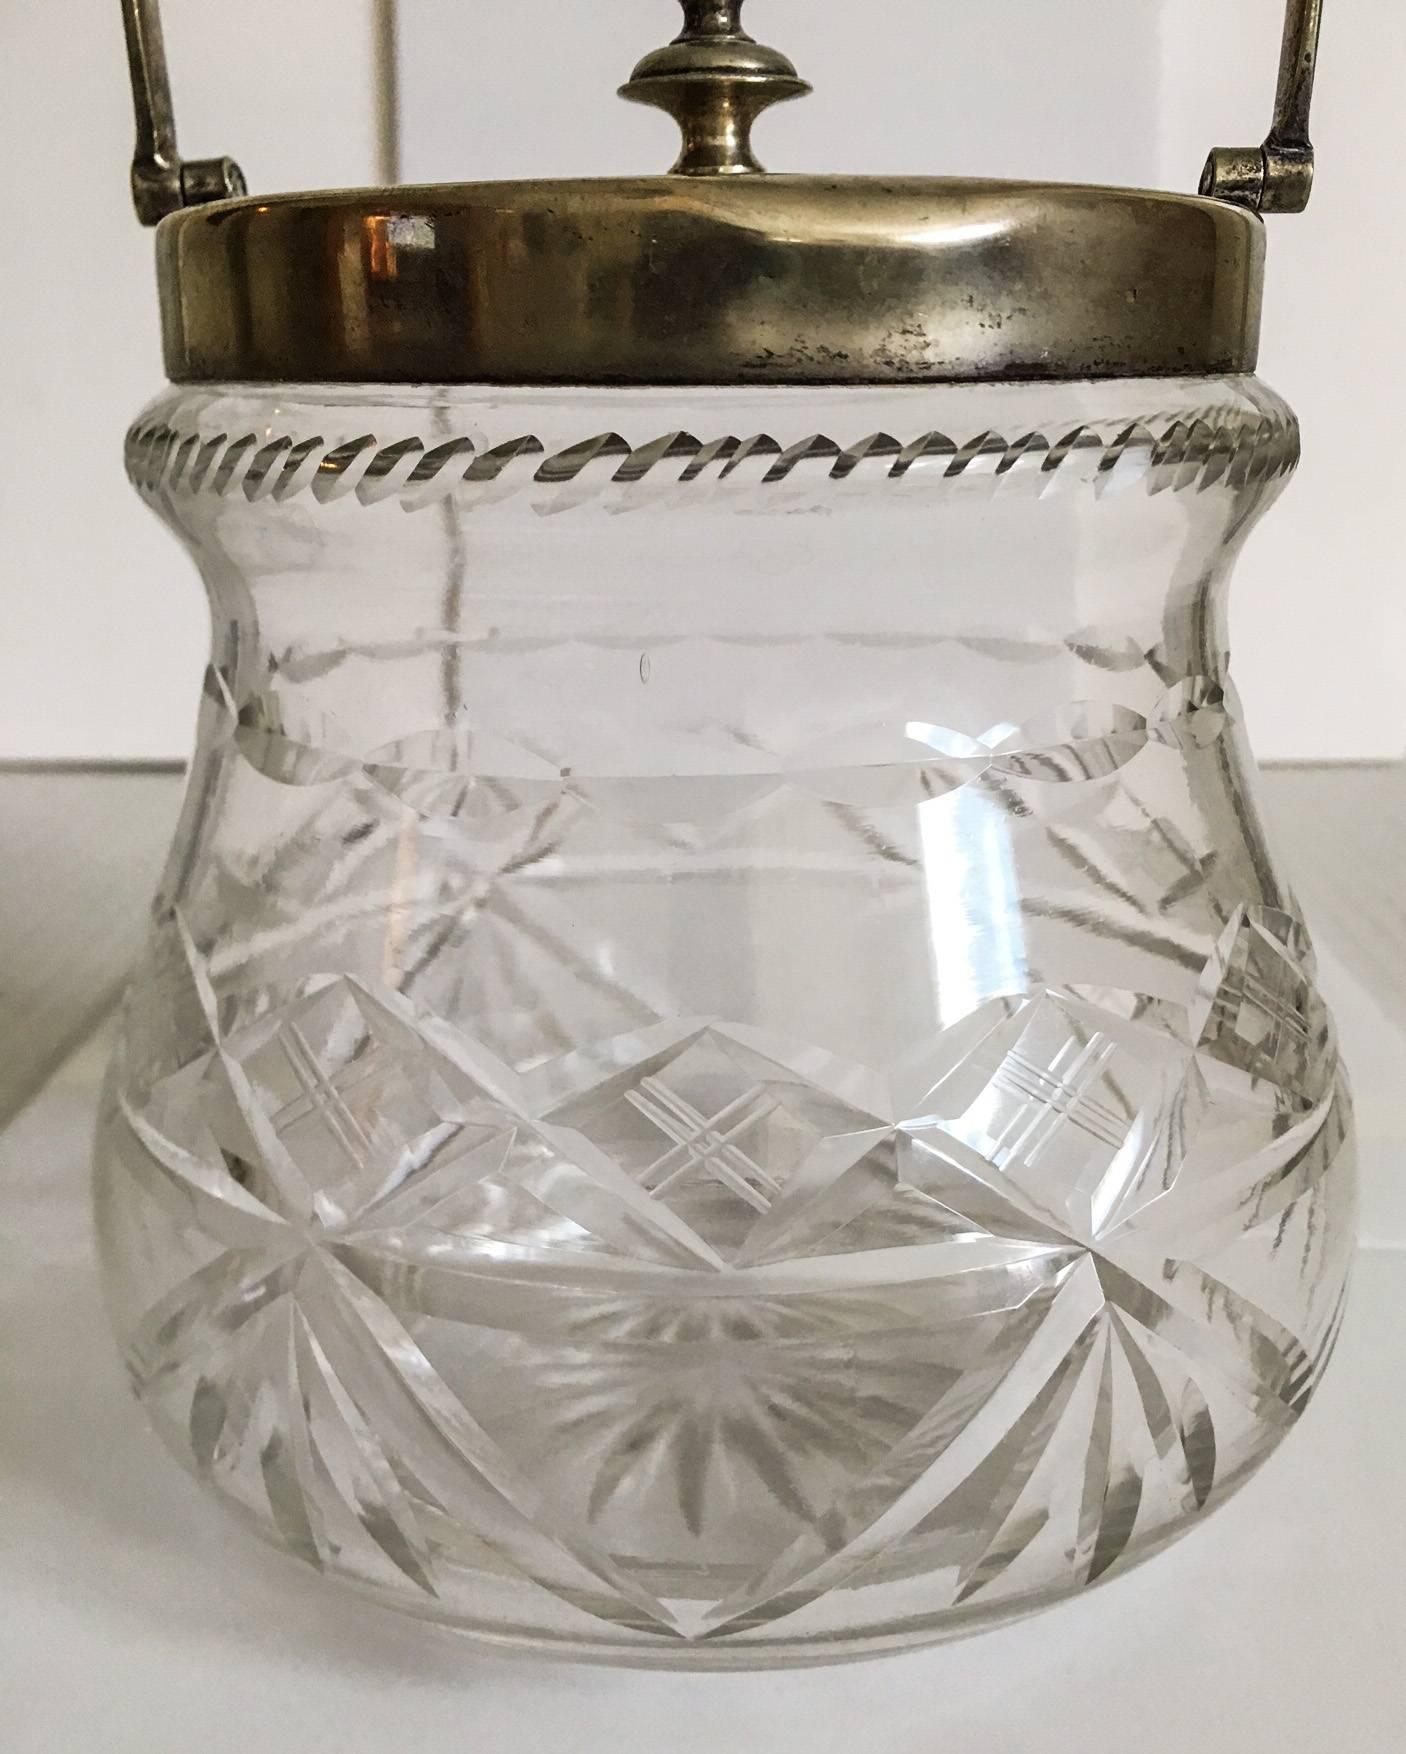 Wonderful deeply cut-glass biscuit jar with an electroplated nickel silver lid and handle by the English firm Slack and Barlow, 1930s. Marked EPNS with the S&B stamp inside a shield. Lid has a beautifully turned finial decoration. Note there is a